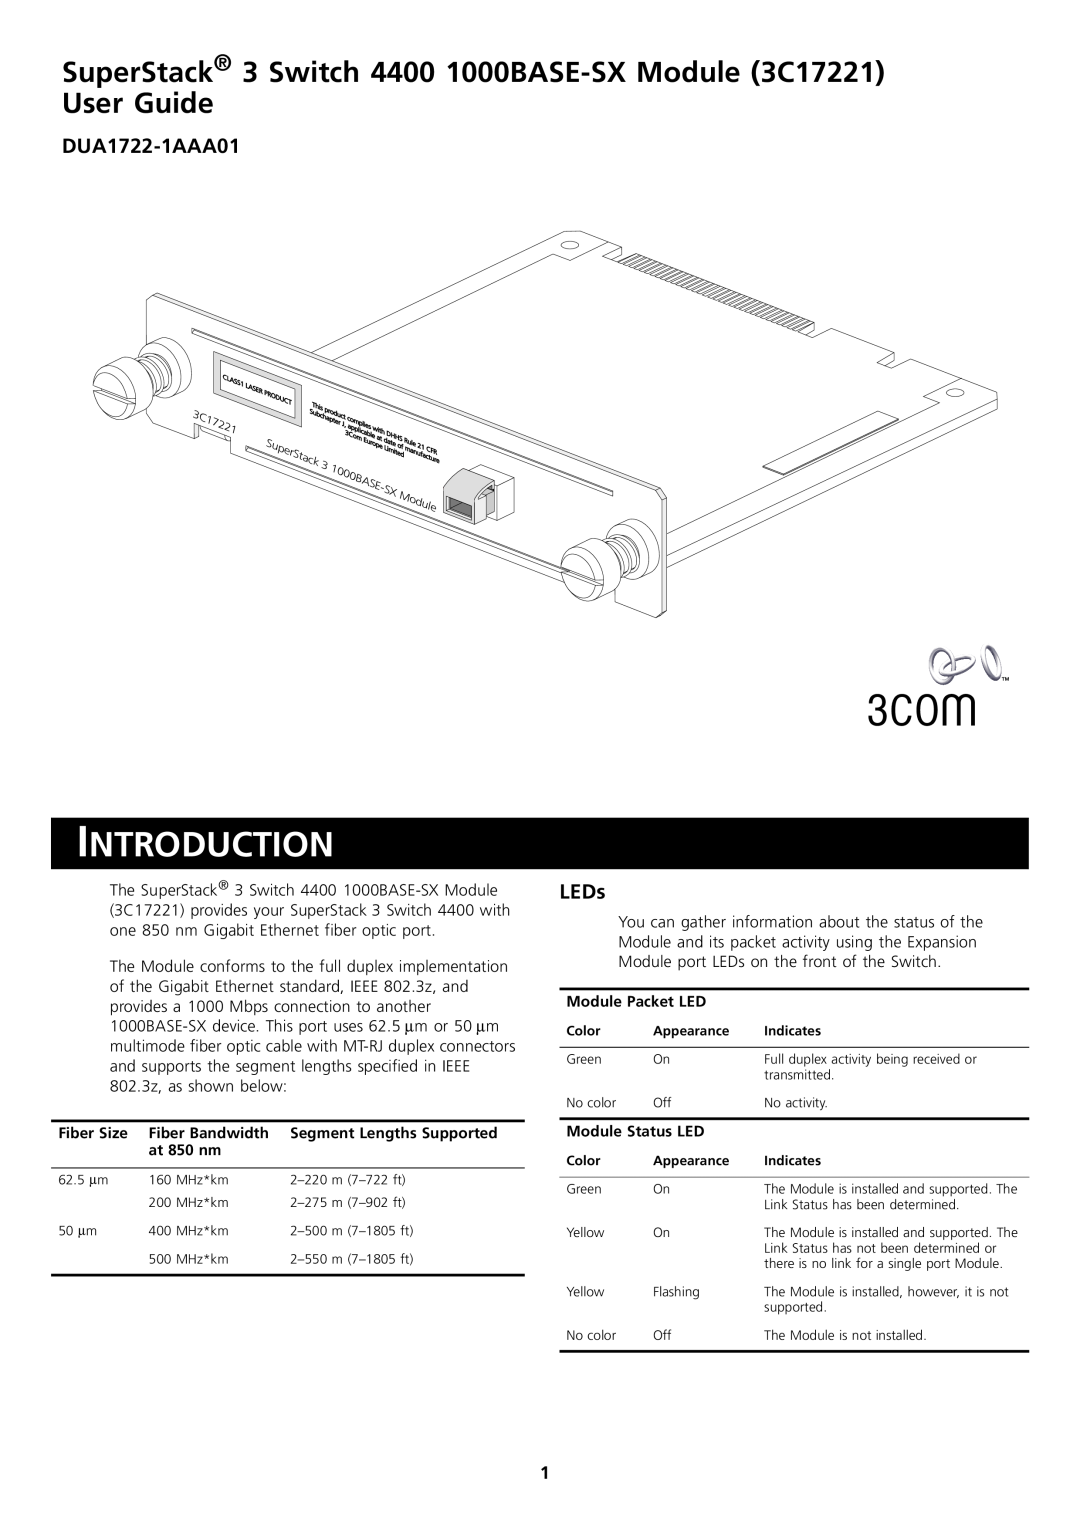 3Com 3C172221 manual Introduction, DUA1722-1AAA01, LEDs, SuperStack 3 Switch 4400 1000BASE-SX Module 3C17221 User Guide 